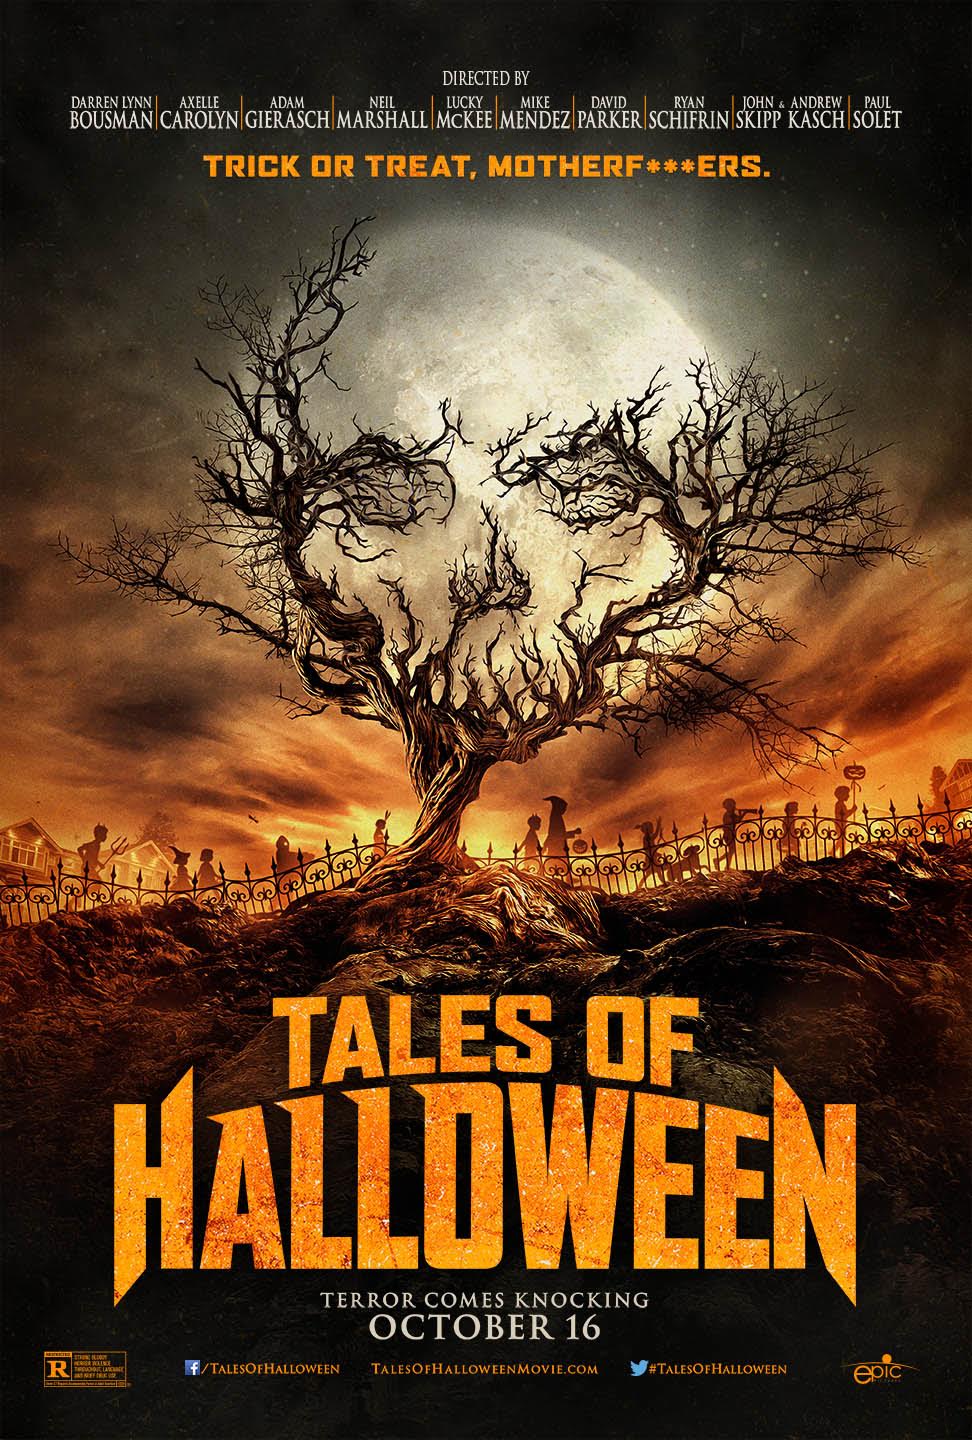 Tales Of Halloween film review: a ghoulish good time